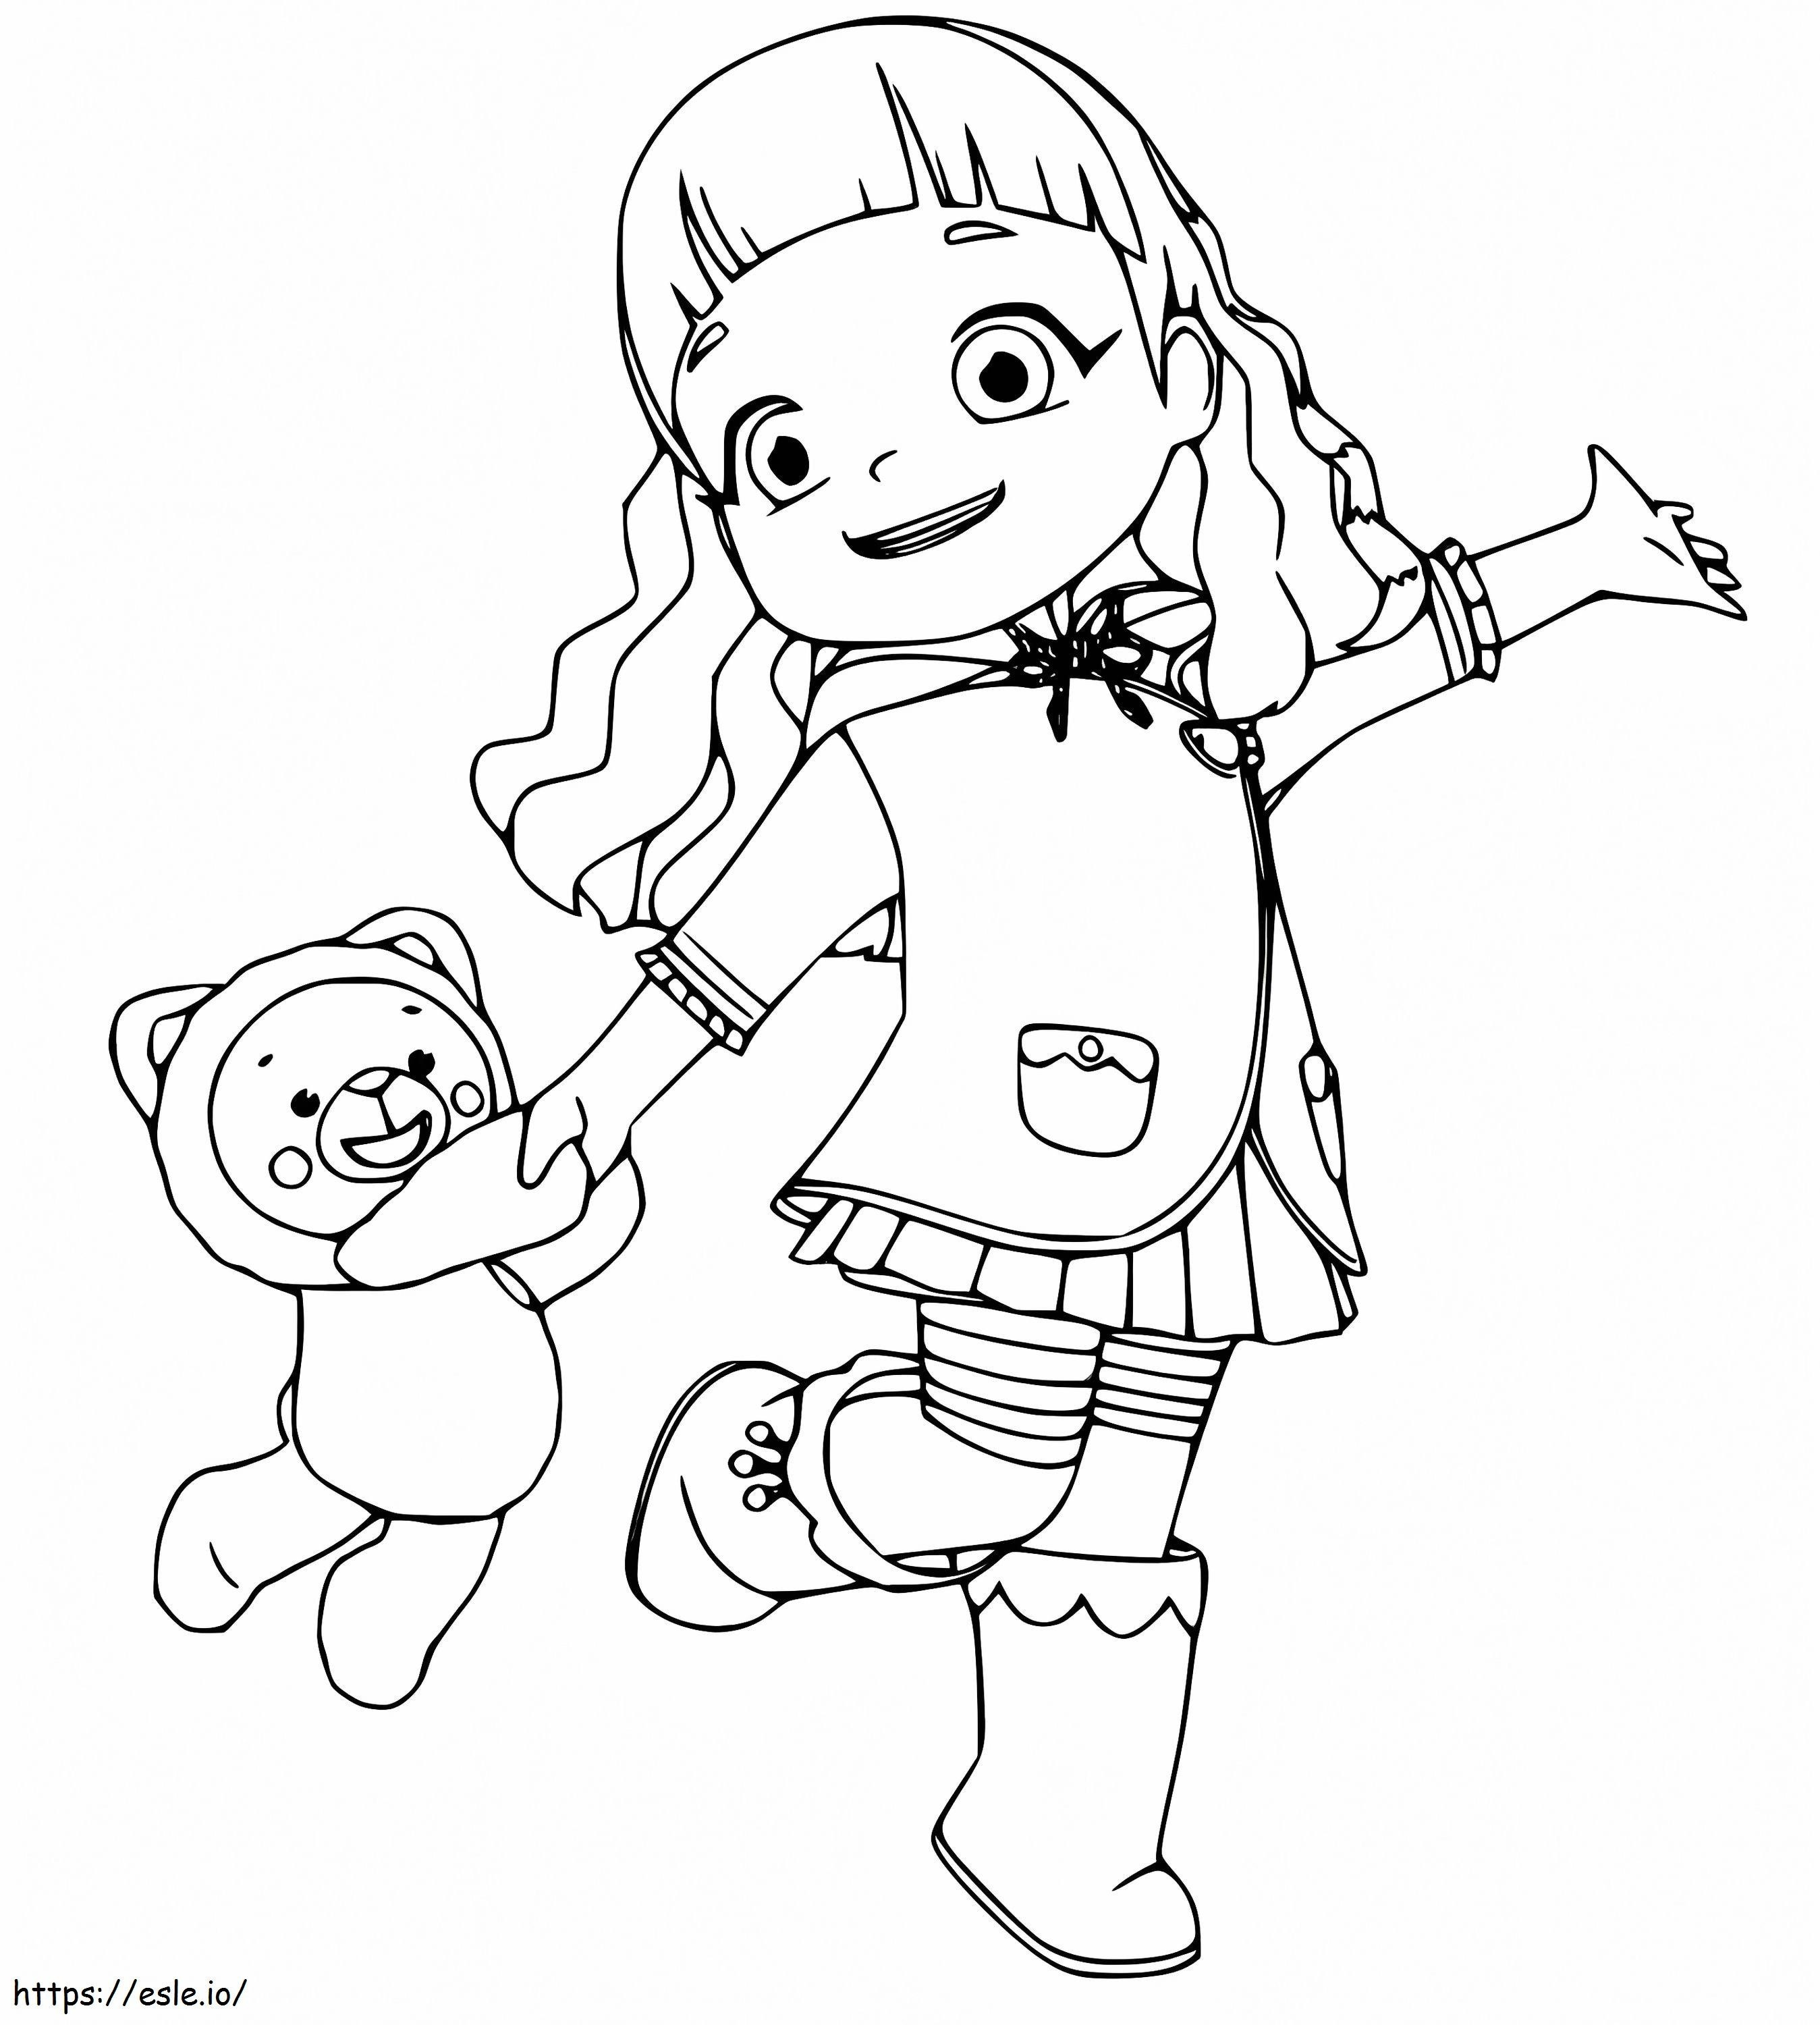 Ruby And Choco coloring page